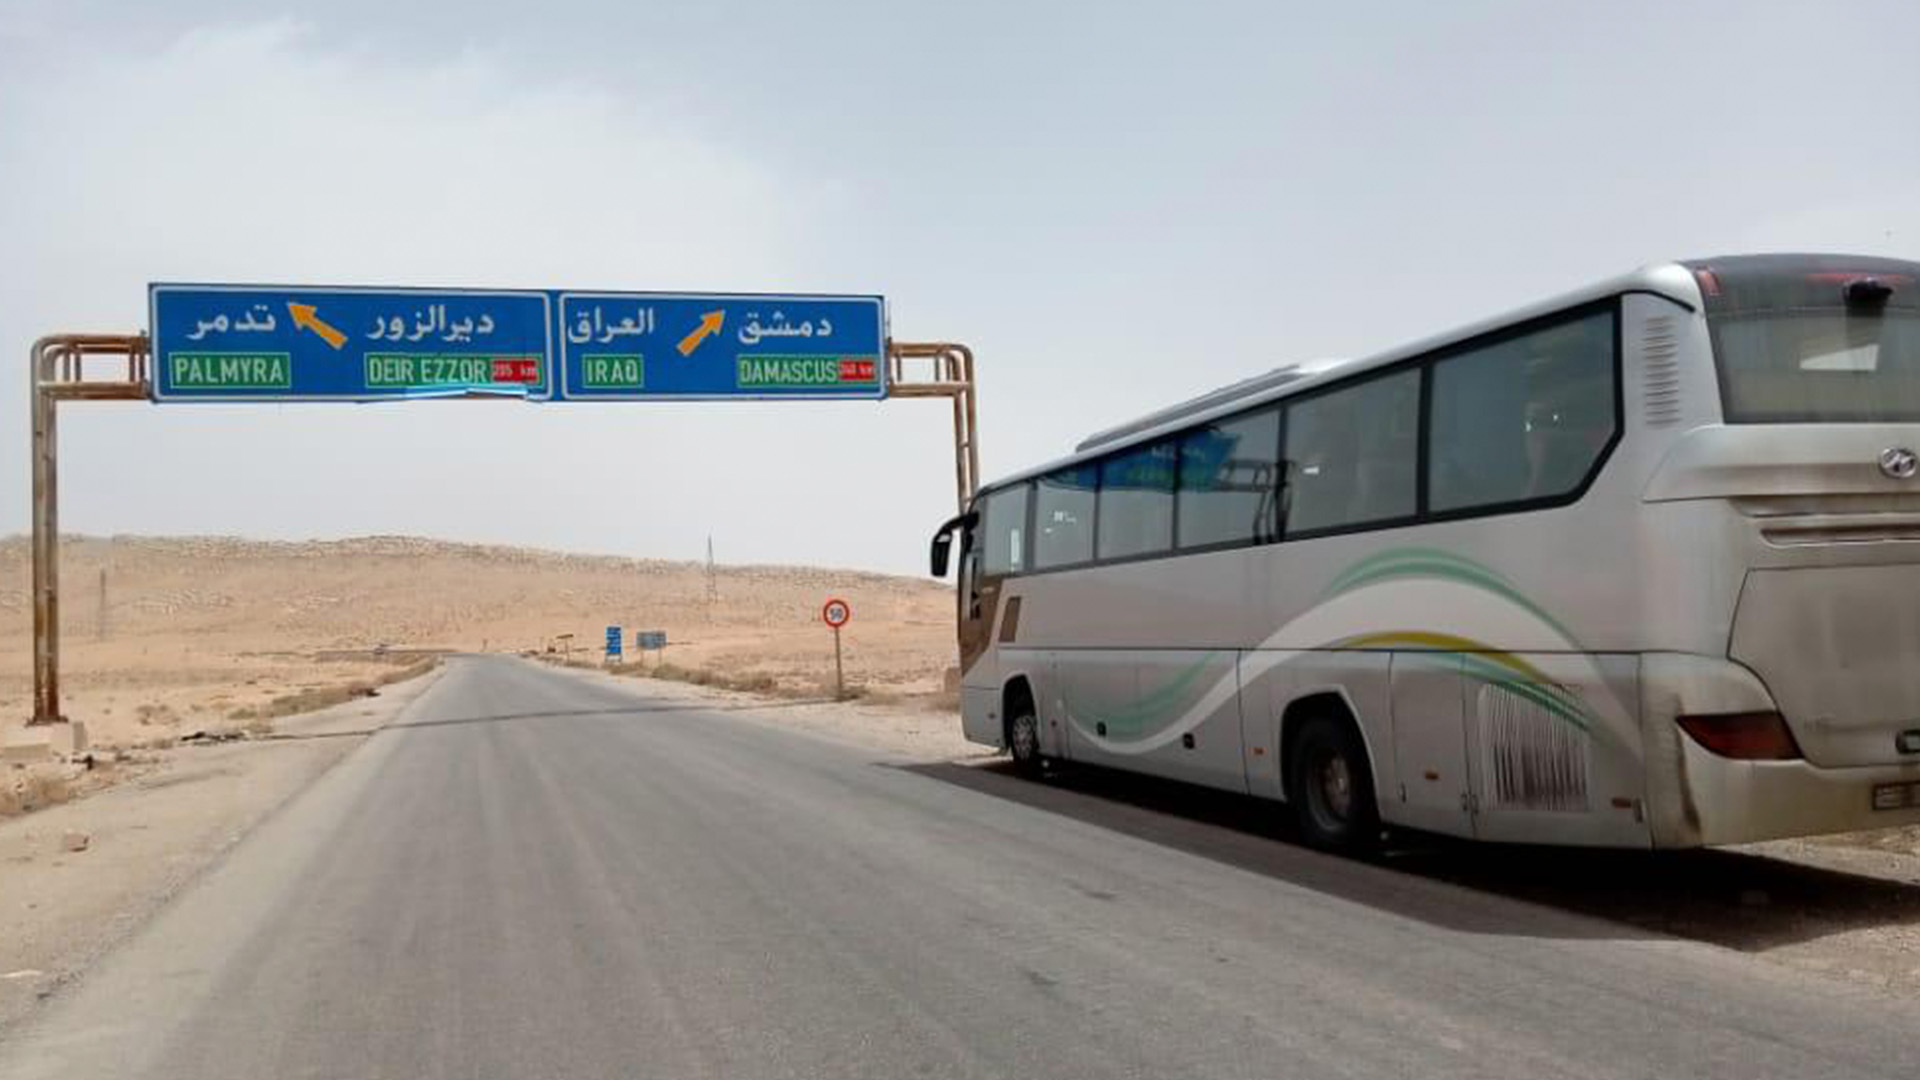 In the photograph, a tourist bus can be seen passing beneath a blue signboard that displays the destinations of Palmyra, Deir EzZor, Iraq and Damascus.